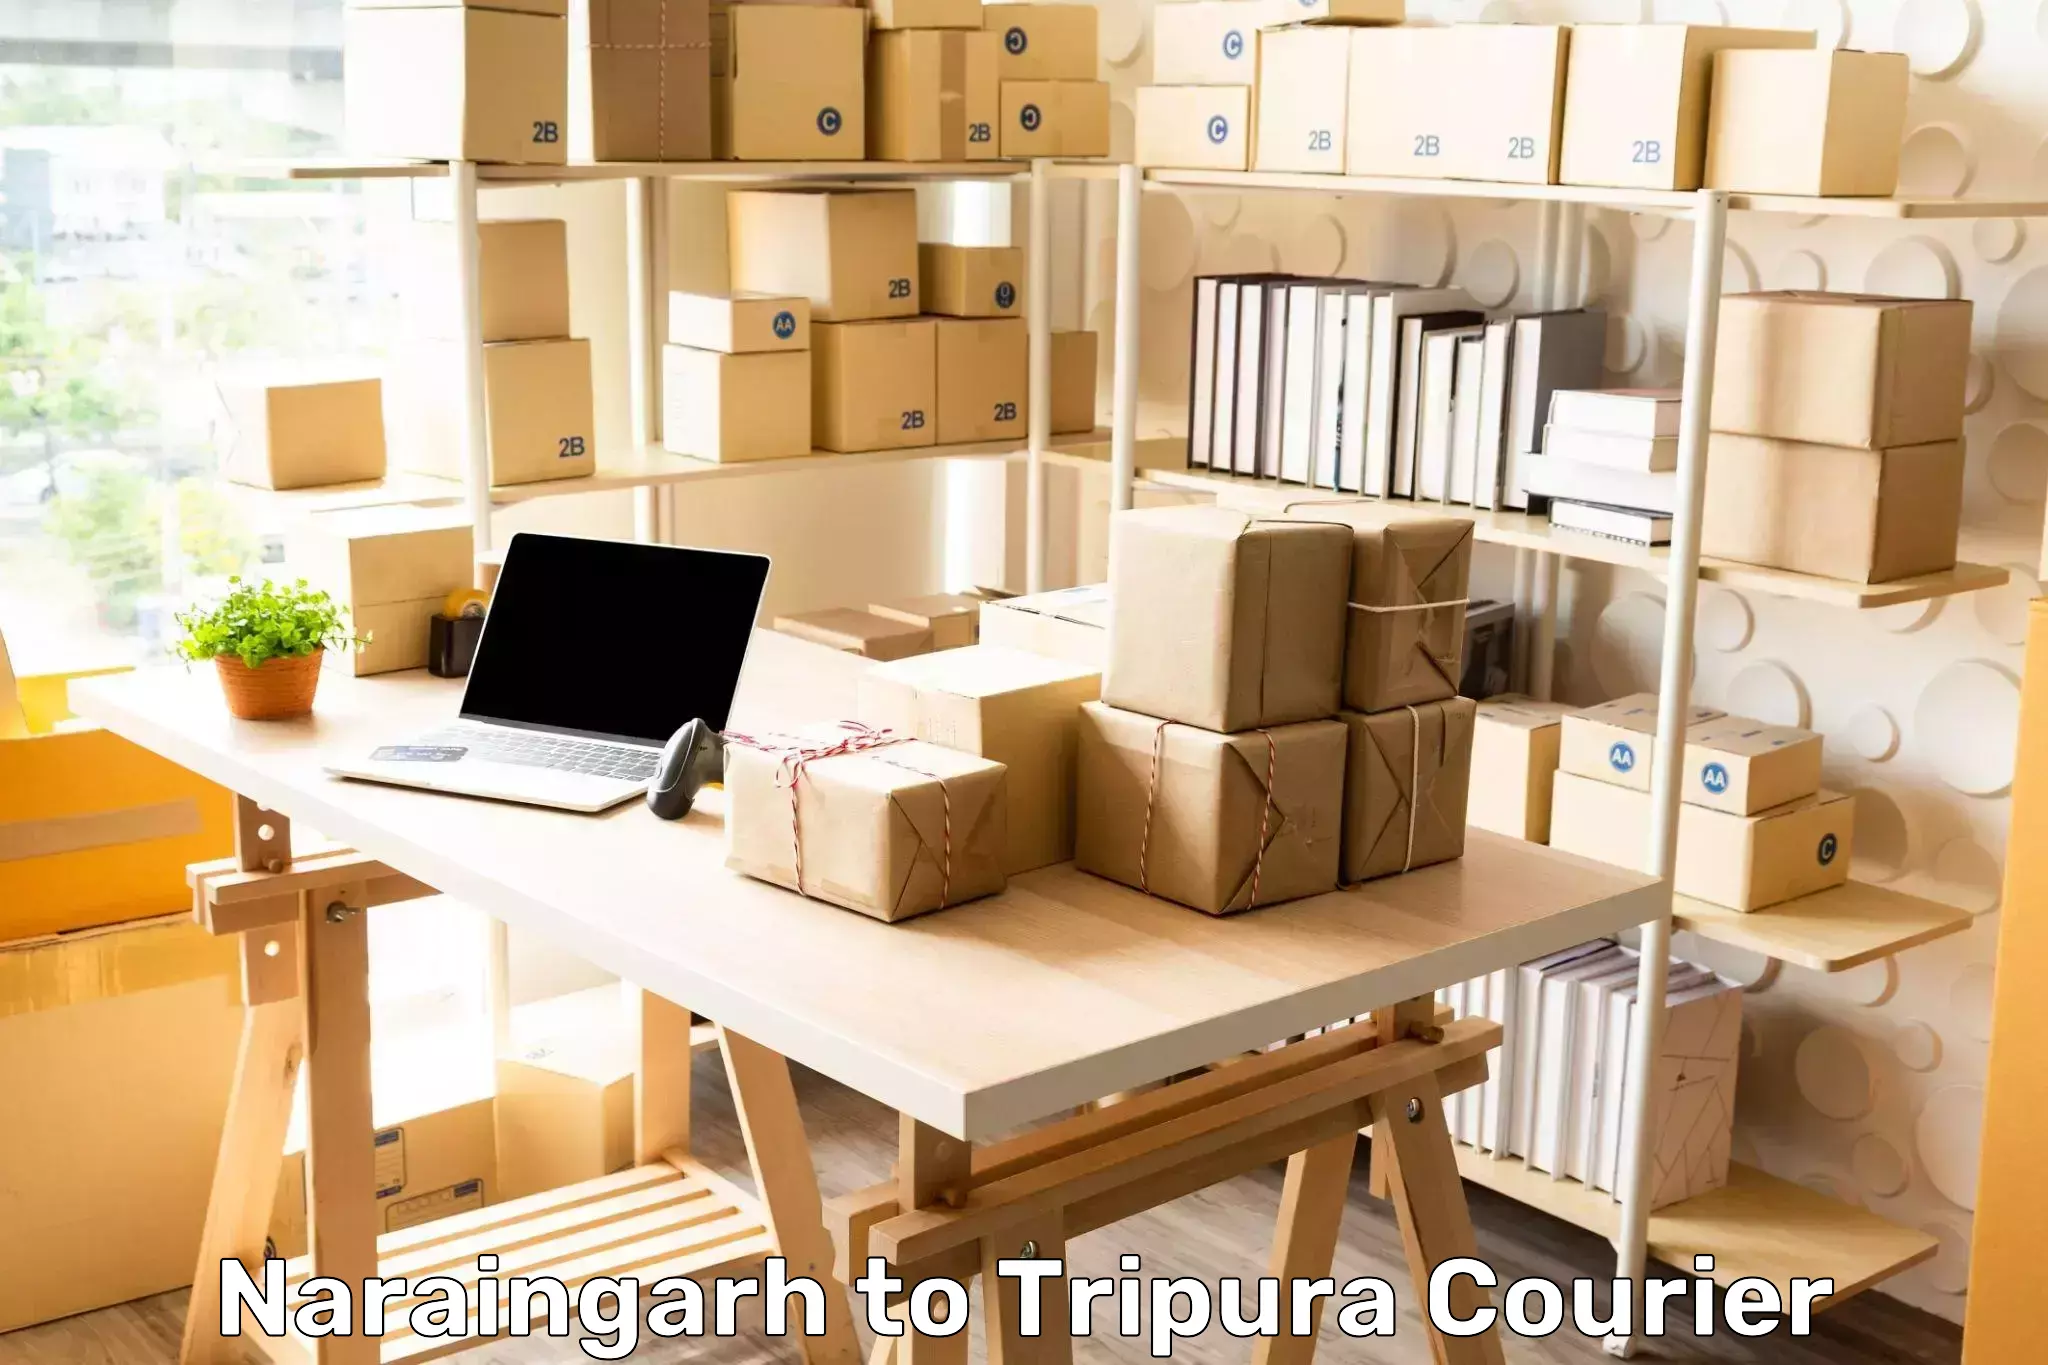 Courier services in Naraingarh to Agartala